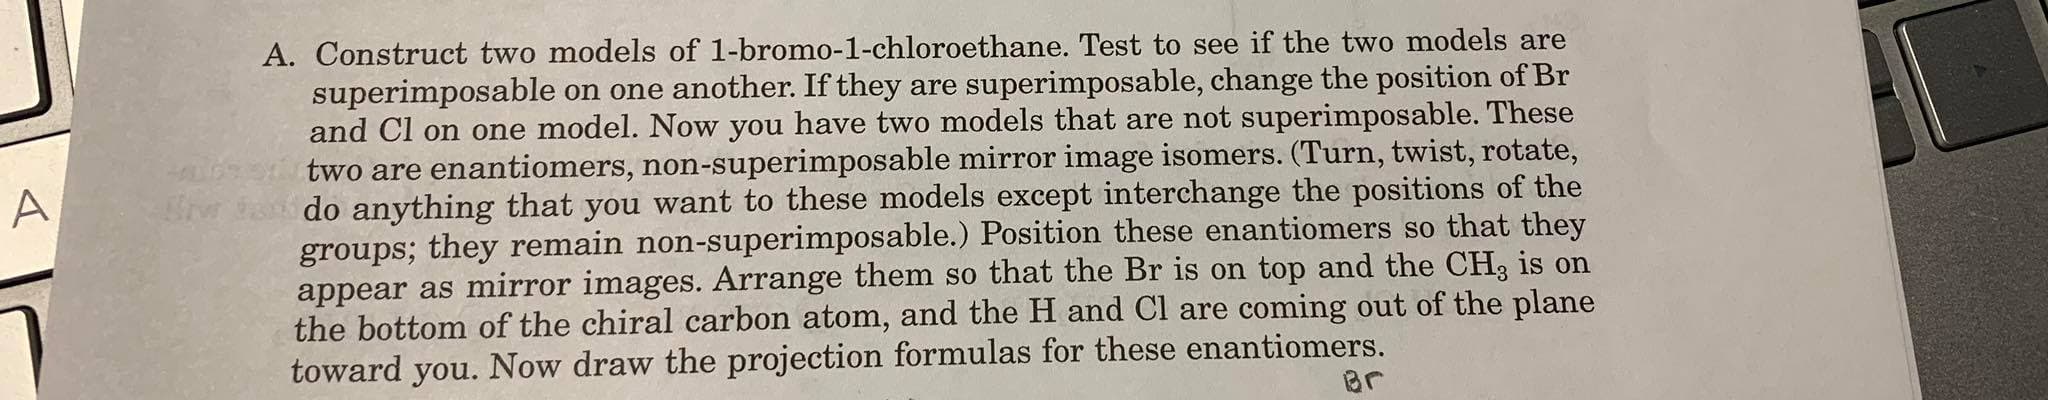 A. Construct two models of 1-bromo-1-chloroethane. Test to see if the two models are
superimposable on one another. If they are superimposable, change the position of Br
and Cl on one model. Now you have two models that are not superimposable. These
two are enantiomers, non-superimposable mirror image isomers. (Turn, twist, rotate,
do anything that you want to these models except interchange the positions of the
groups; they remain non-superimposable.) Position these enantiomers so that they
appear as mirror images. Arrange them so that the Br is on top and the CH3 is on
the bottom of the chiral carbon atom, and the H and Cl are coming out of the plane
toward you. Now draw the projection formulas for these enantiomers.
Br
